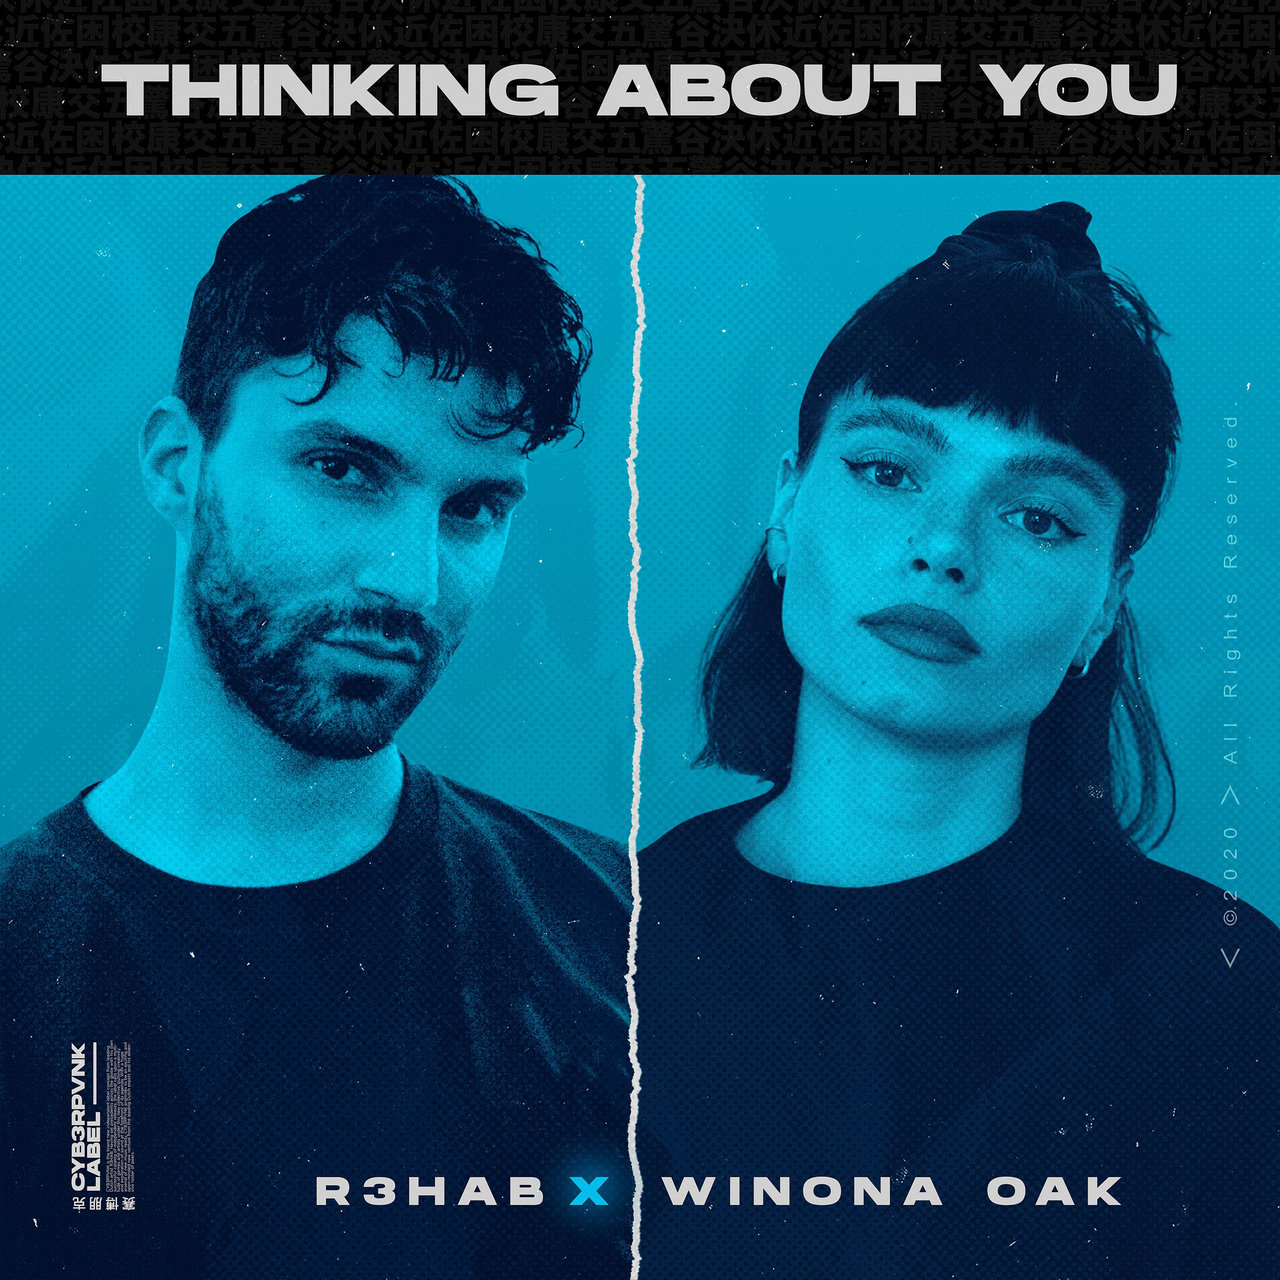 R3HAB & Winona Oak Thinking About You cover artwork